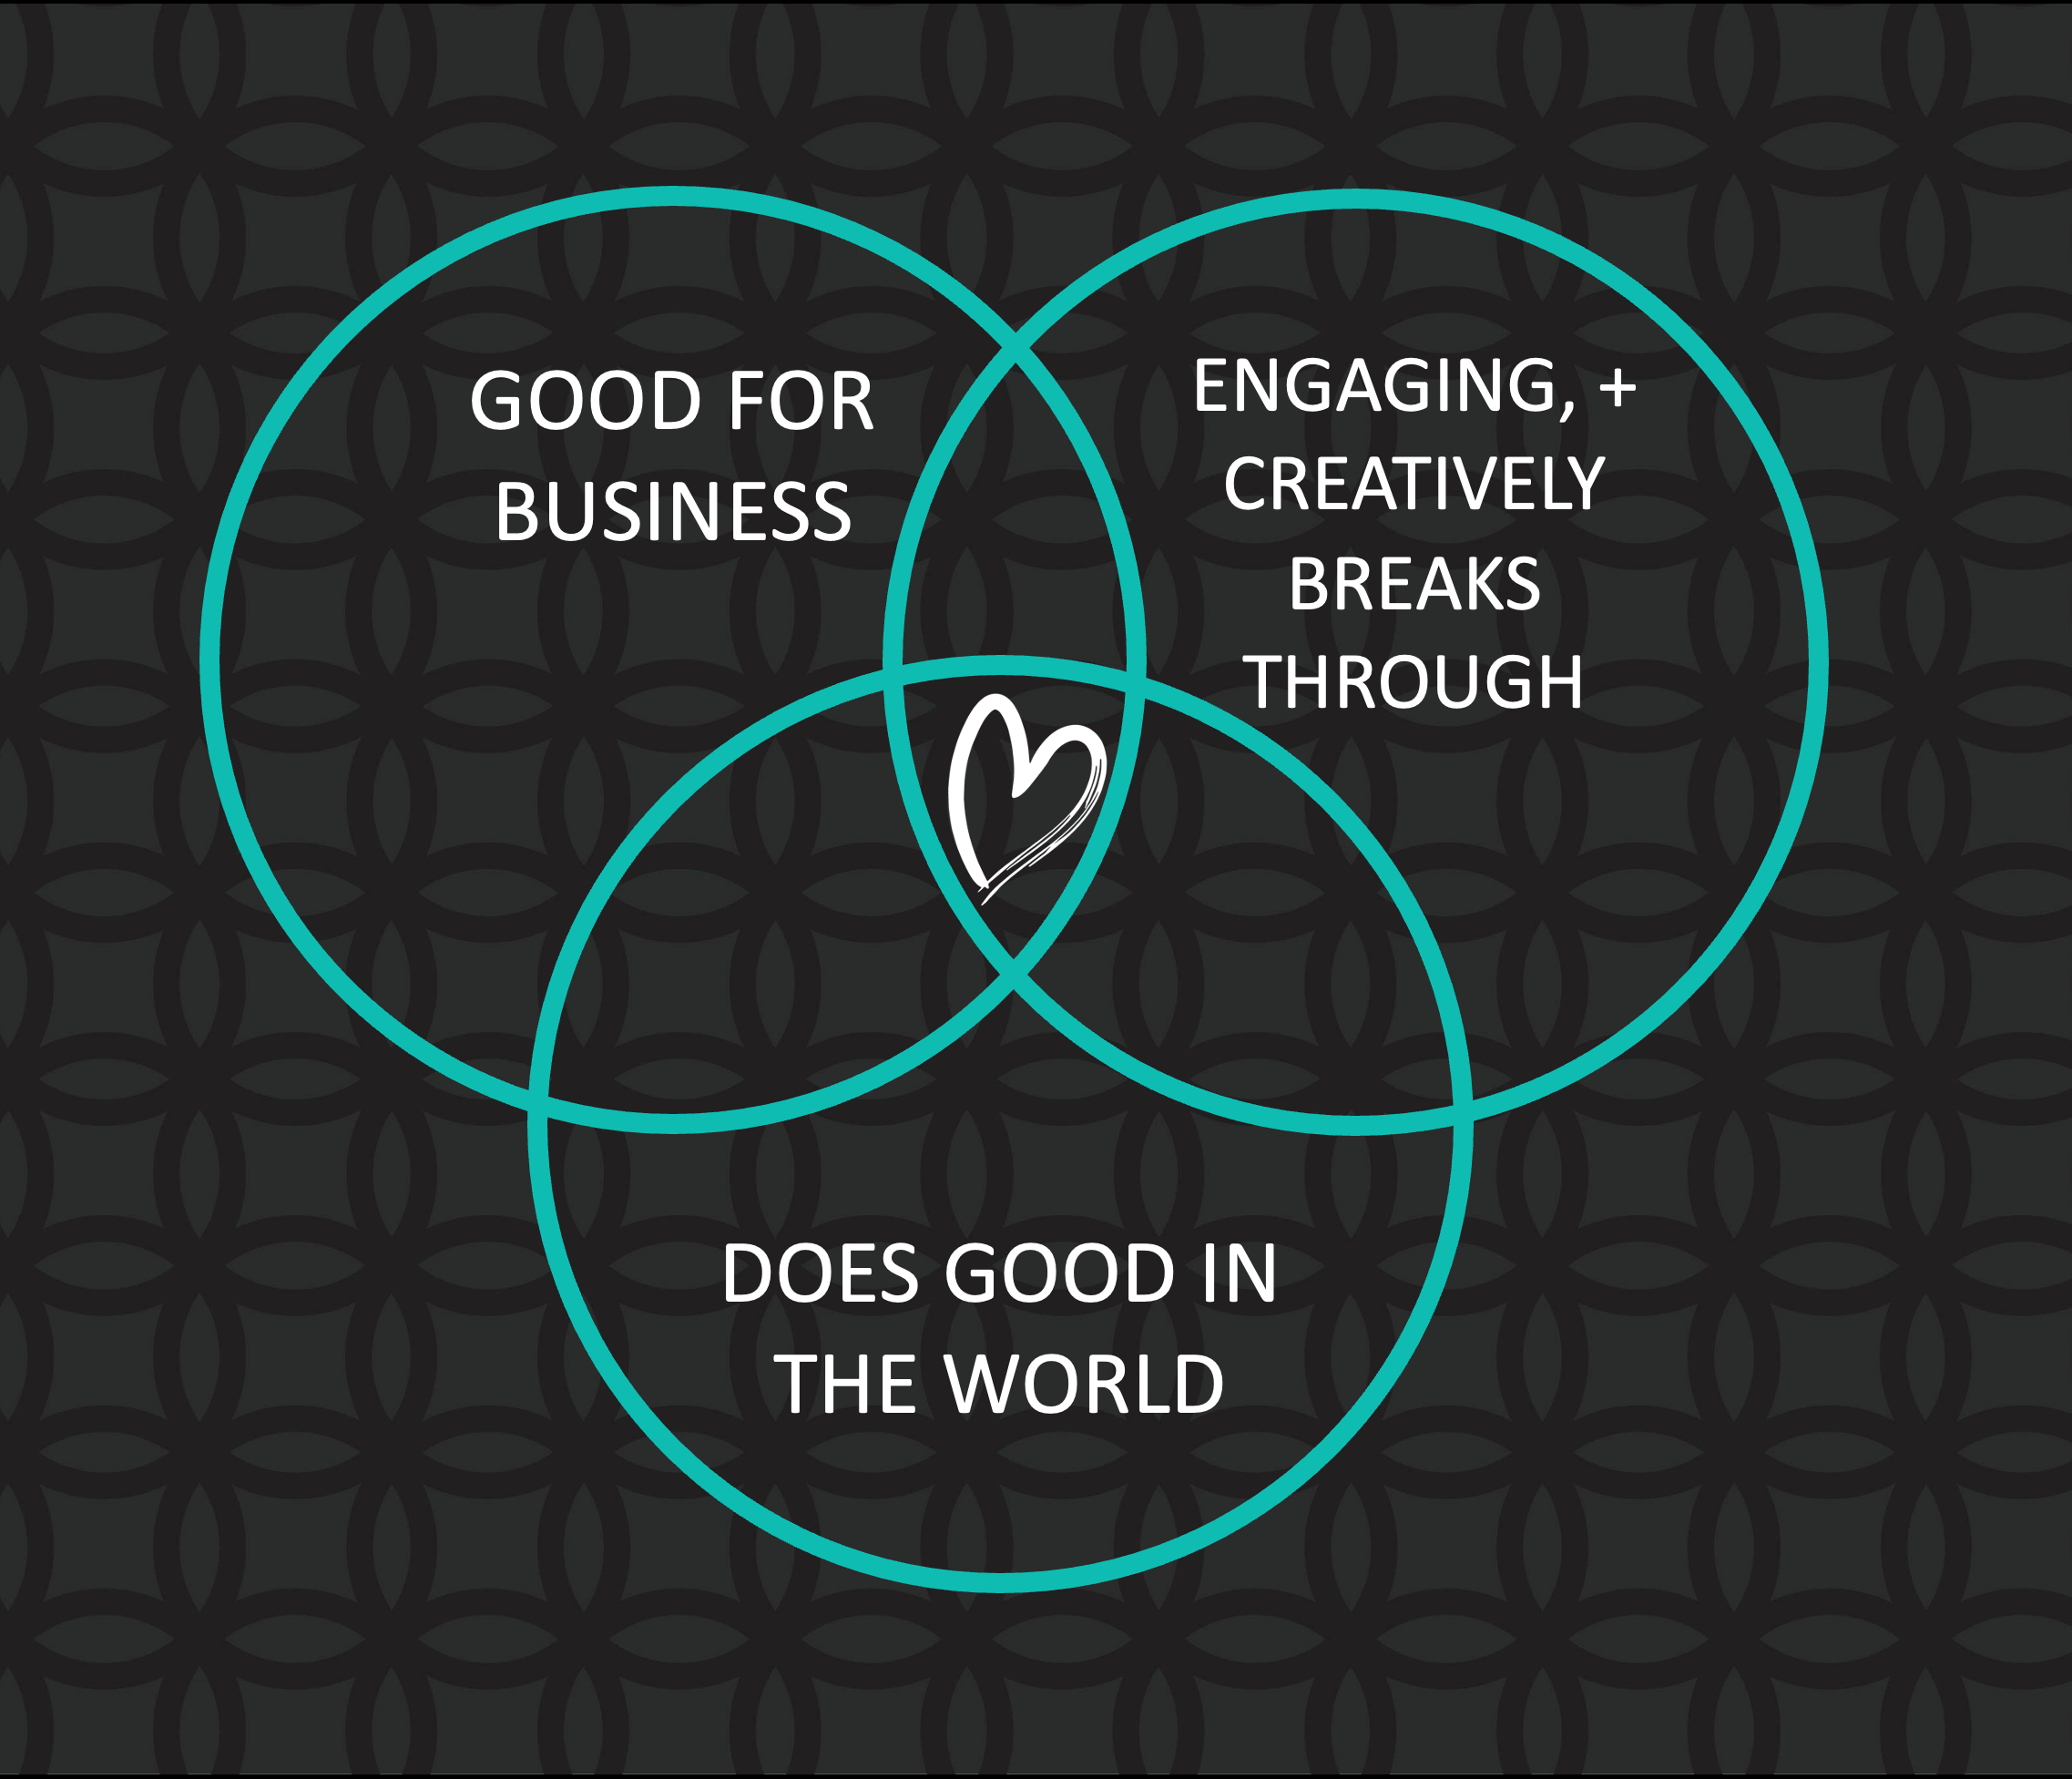 Infographic of venn diagram. First circle: good for business, second circle: does good in the world, third circle: engagin and creatively breaks through